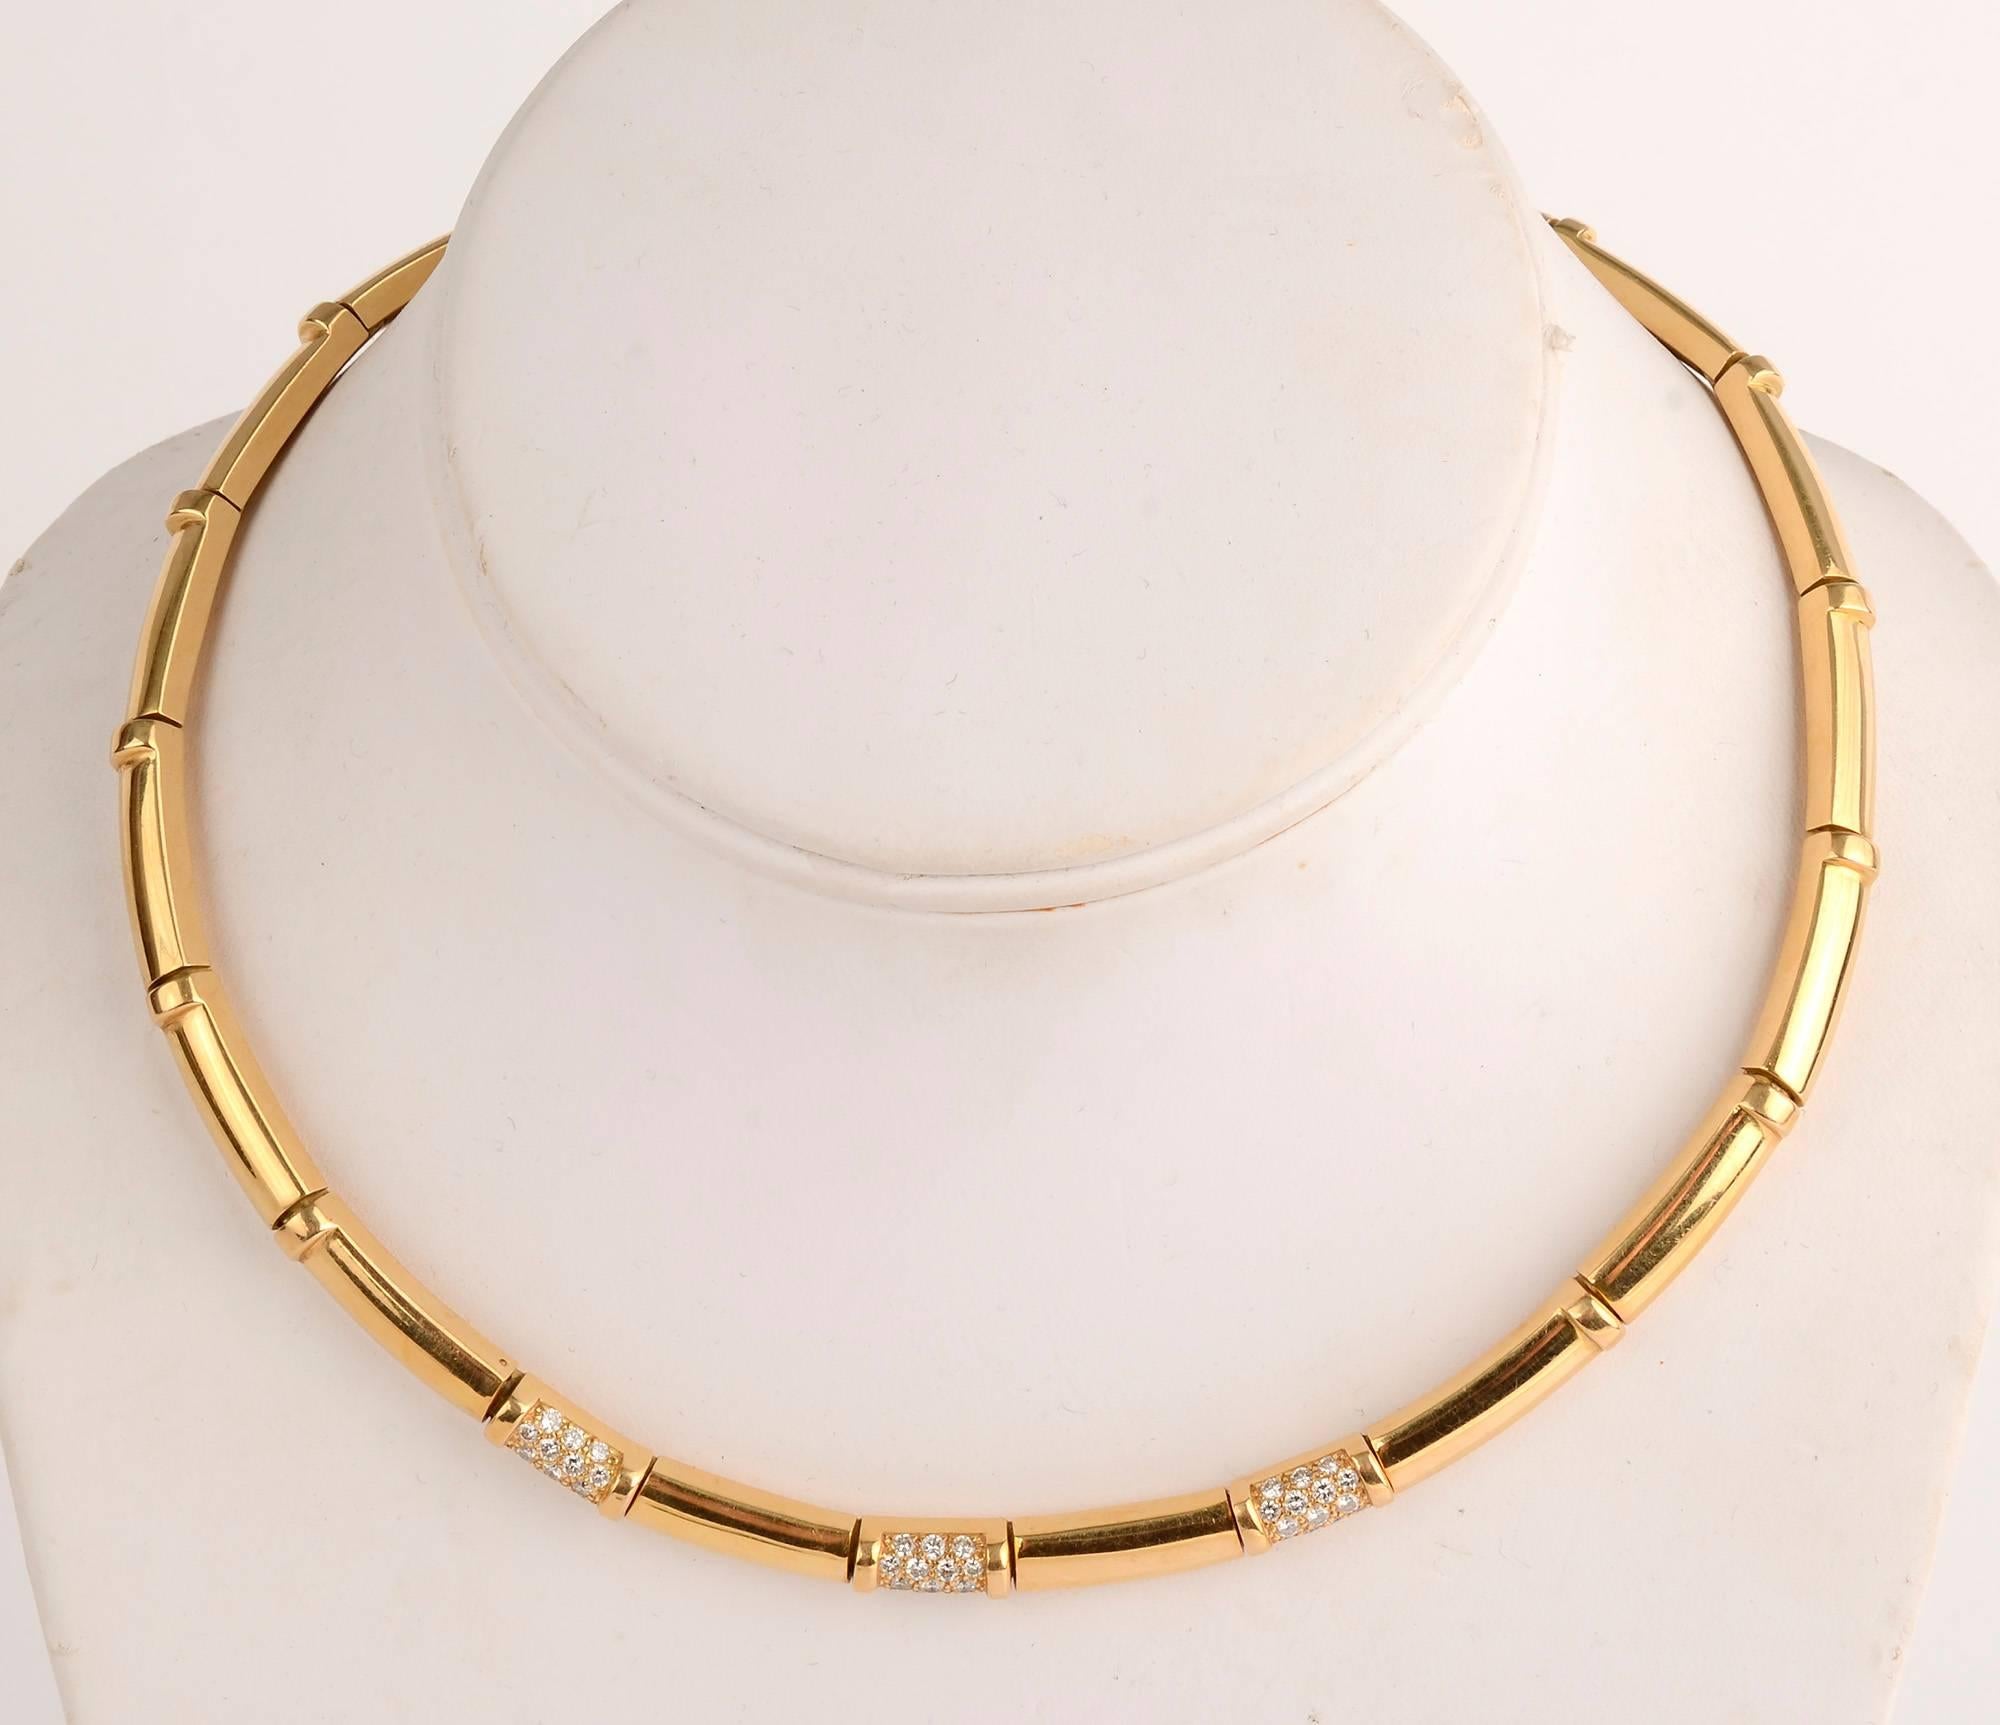 Elegant choker necklace by Chaumet with three panels of diamonds. The 42 diamonds weigh approximately 1 carat and are G color, VS quality. The necklace is made if 3/4 inch gold panels making it very flexible and comfortable to wear. Length is